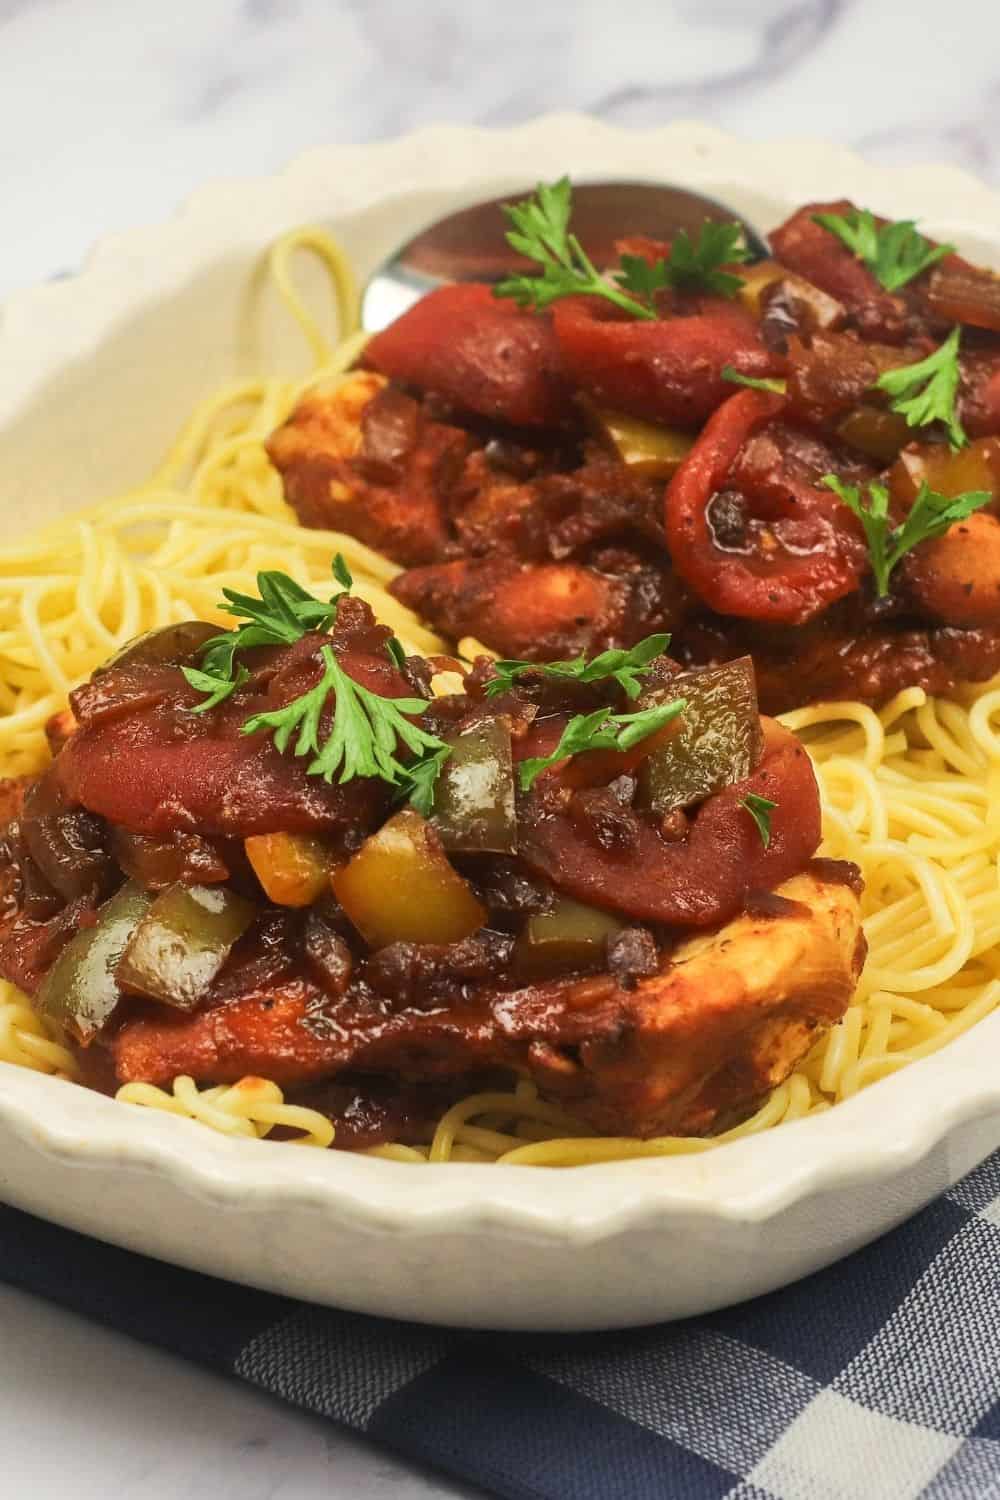 https://www.midlifehealthyliving.com/wp-content/uploads/2020/02/Chicken-Cacciatore-plated.jpg